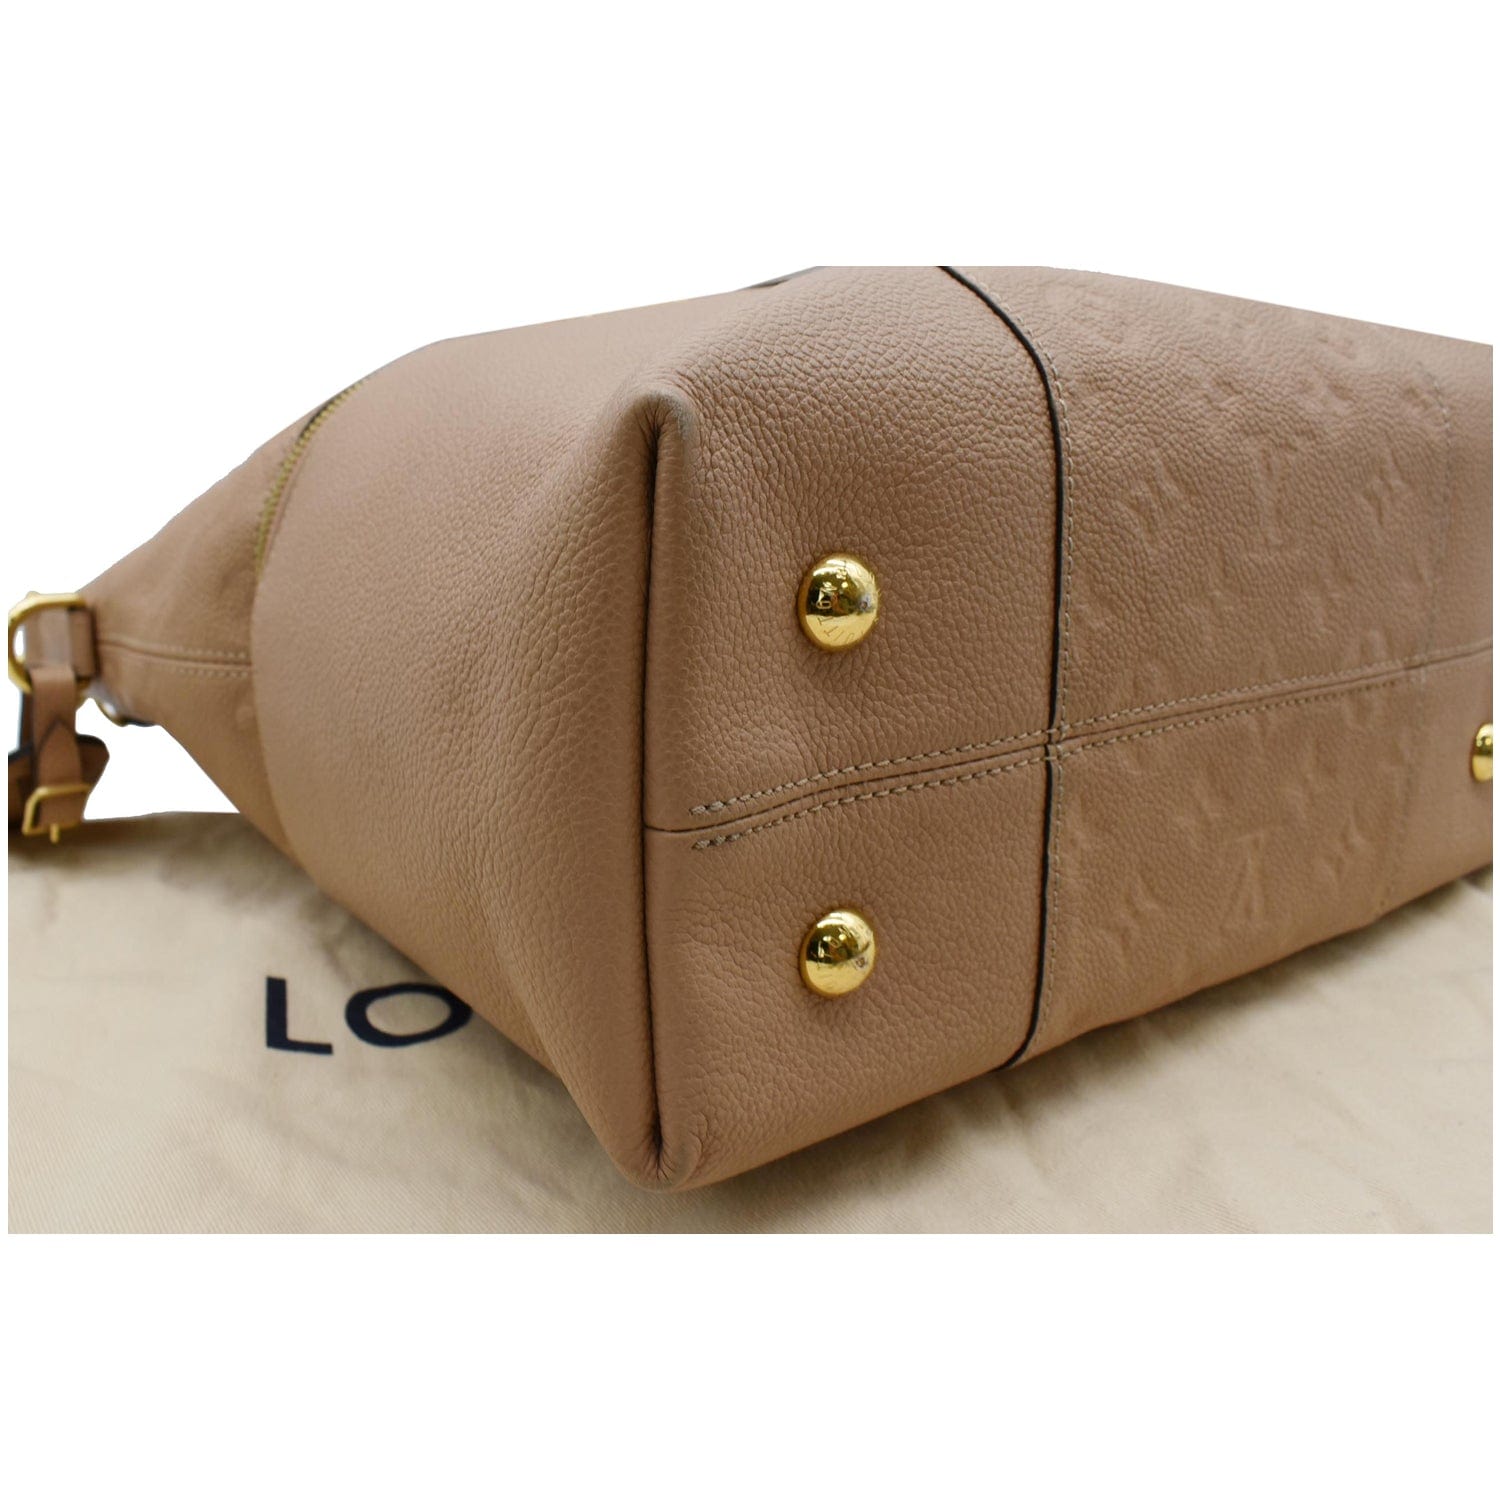 All about the neutrals! Shop this beautiful Louis Vuitton Empreinte  Bagatelle Hobo bag on www.mymoshposh.com!